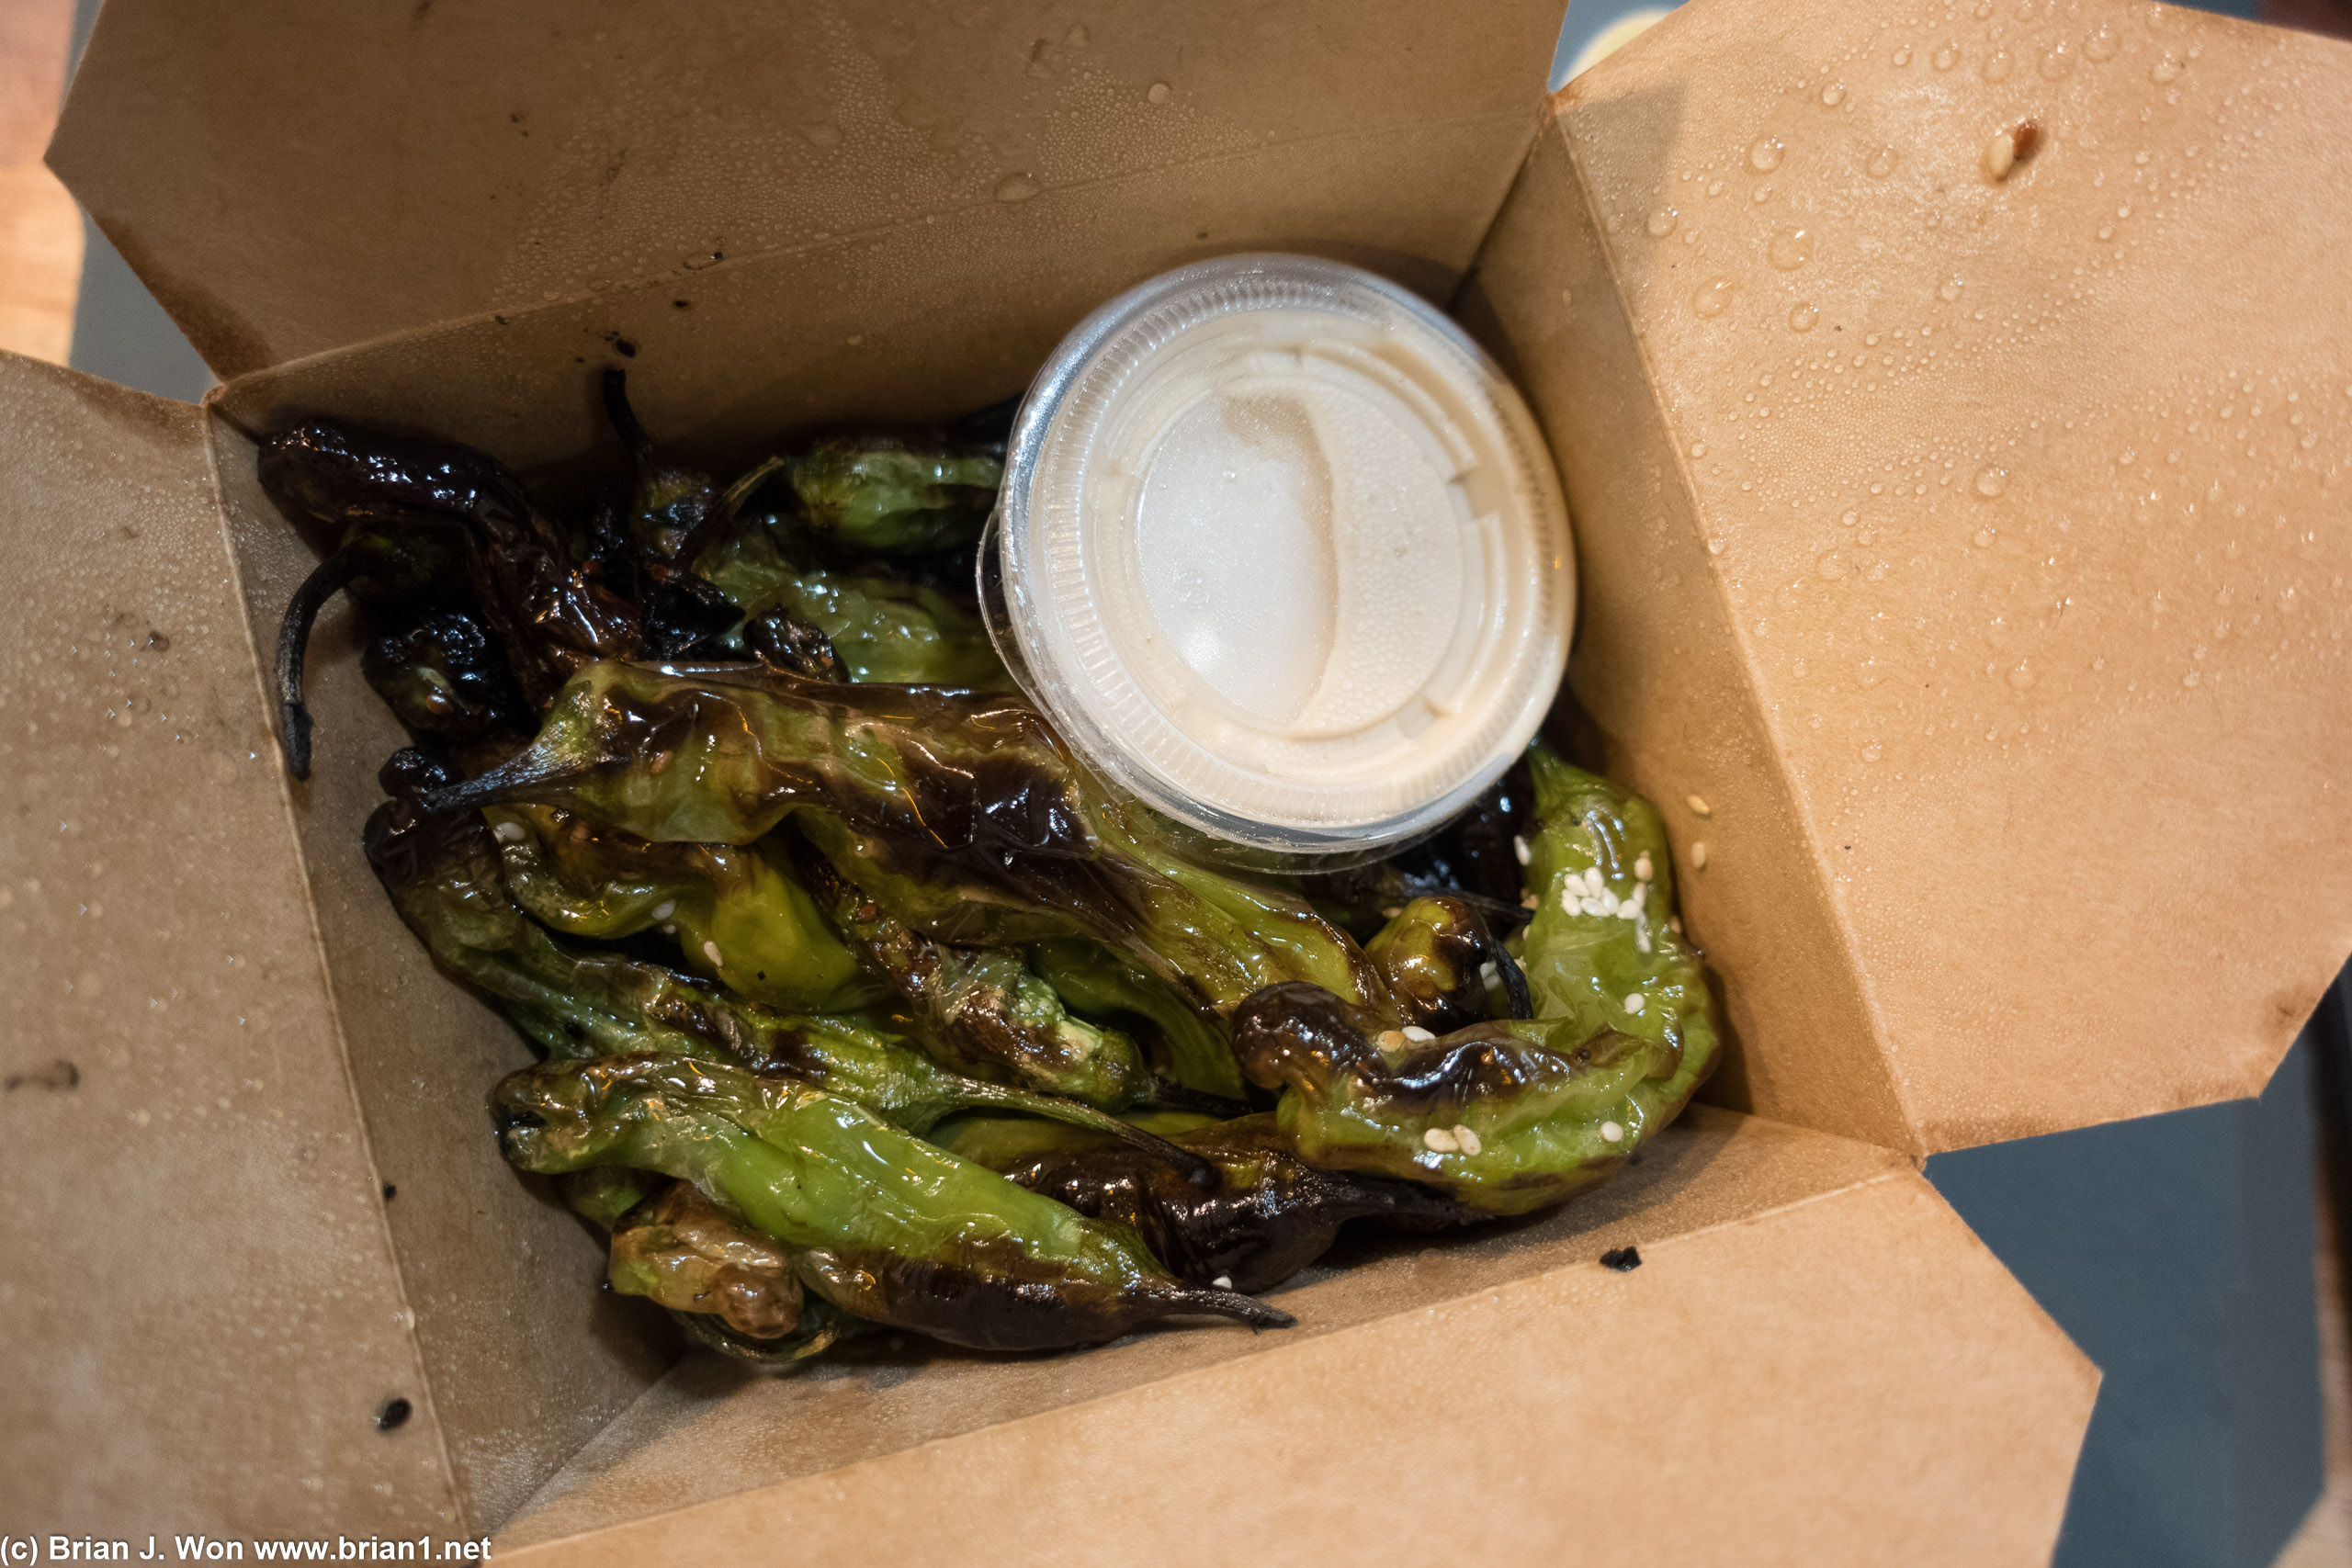 Shishito peppers were good. Not spicy.